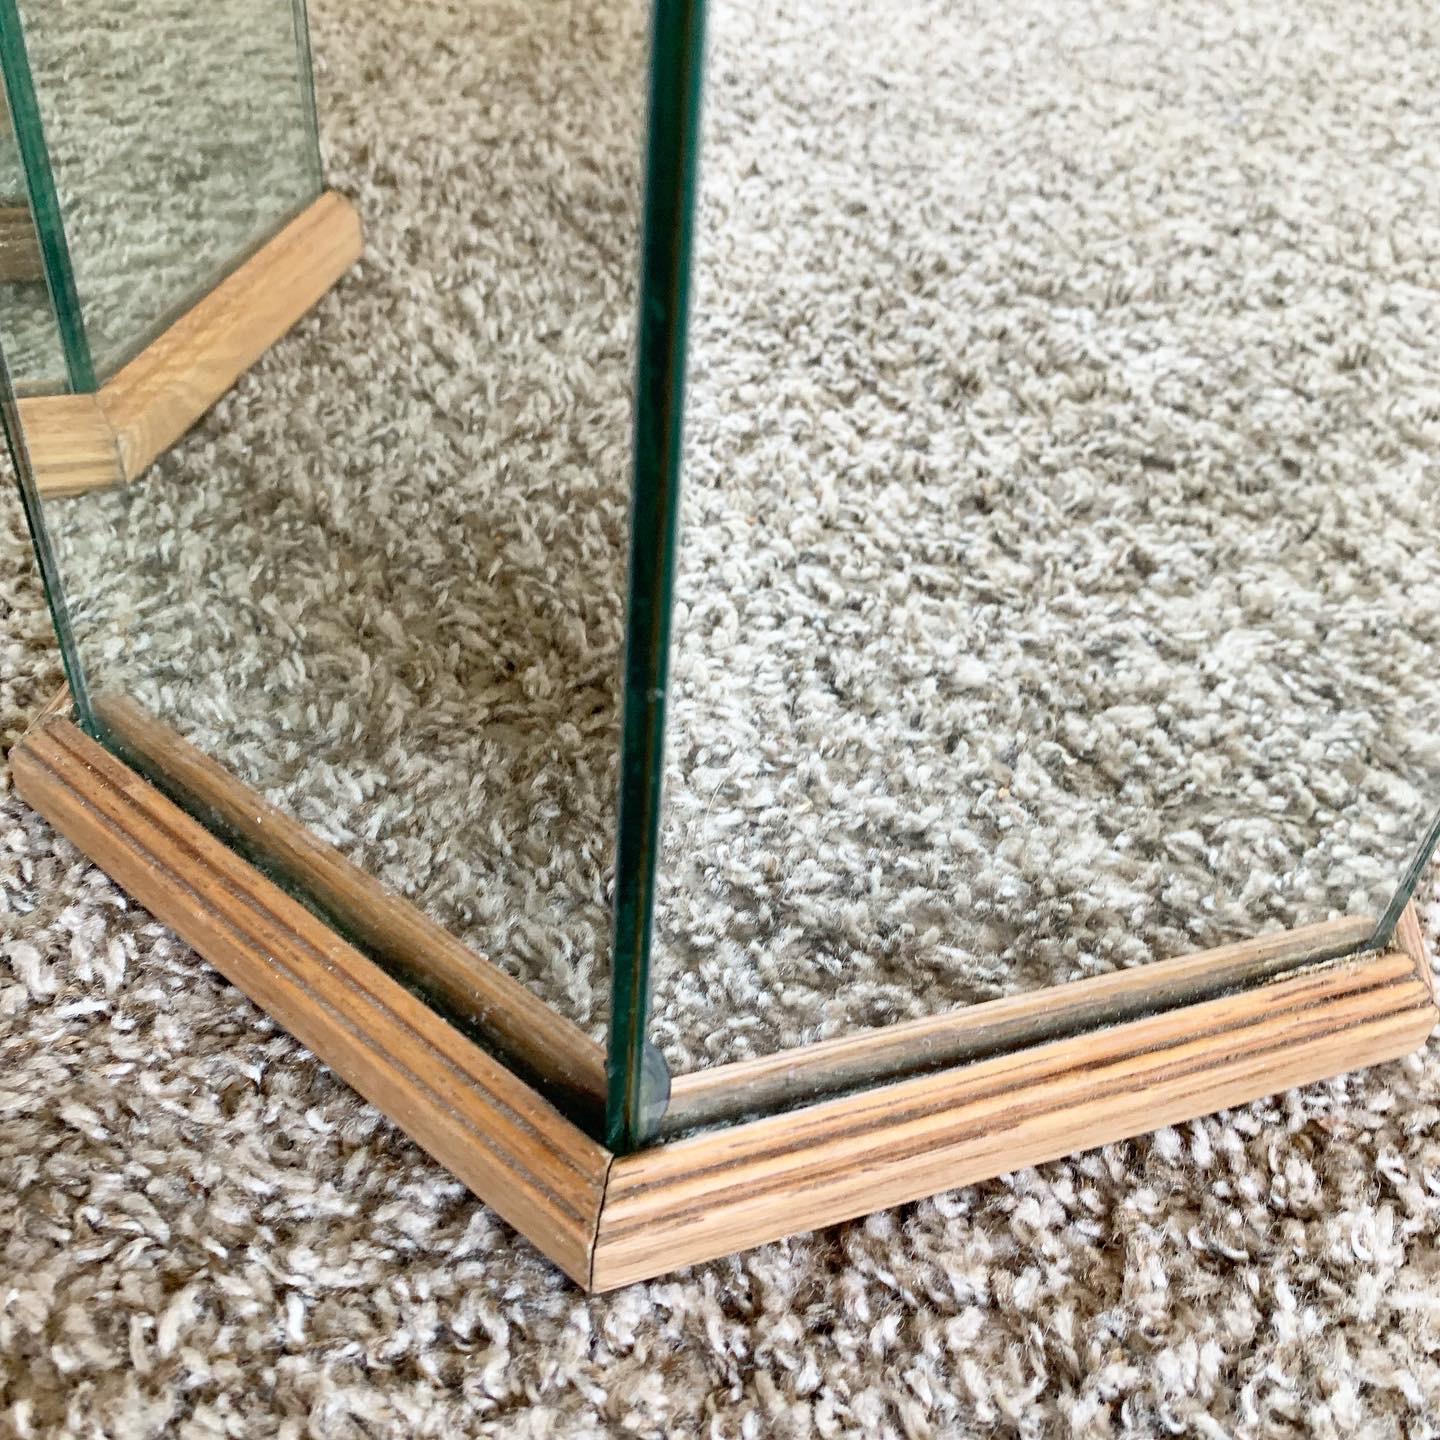 Postmodern Mirrored Hexagonal Wooden Framed Pedestal Side Tables - a Pair In Good Condition For Sale In Delray Beach, FL